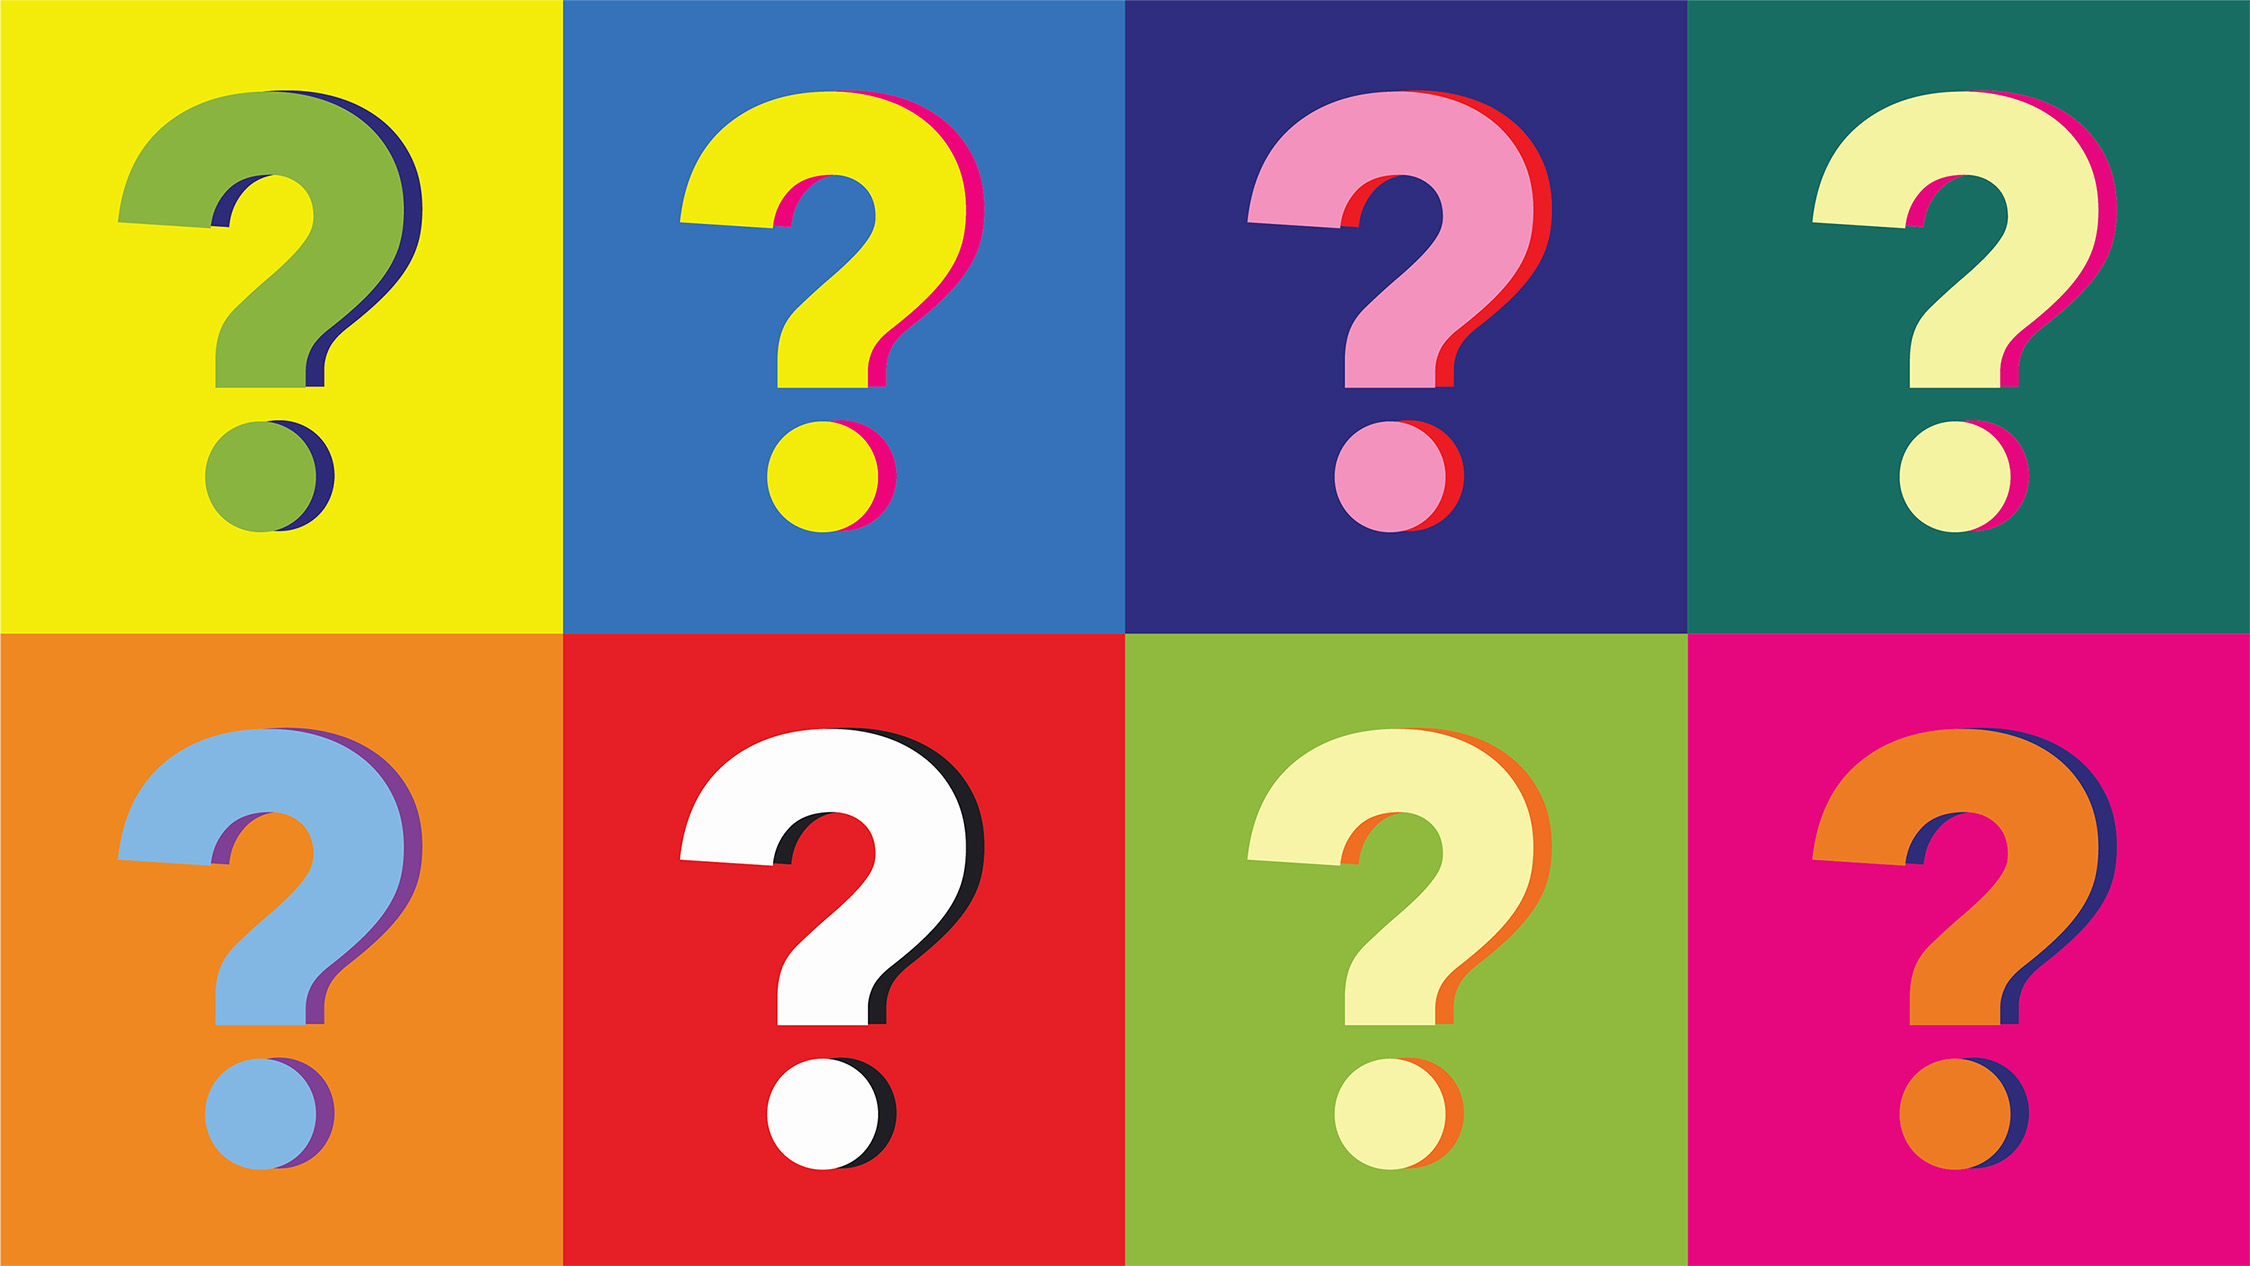 Solve Problems or Create Them - colored question marks on Andy Warhol style background